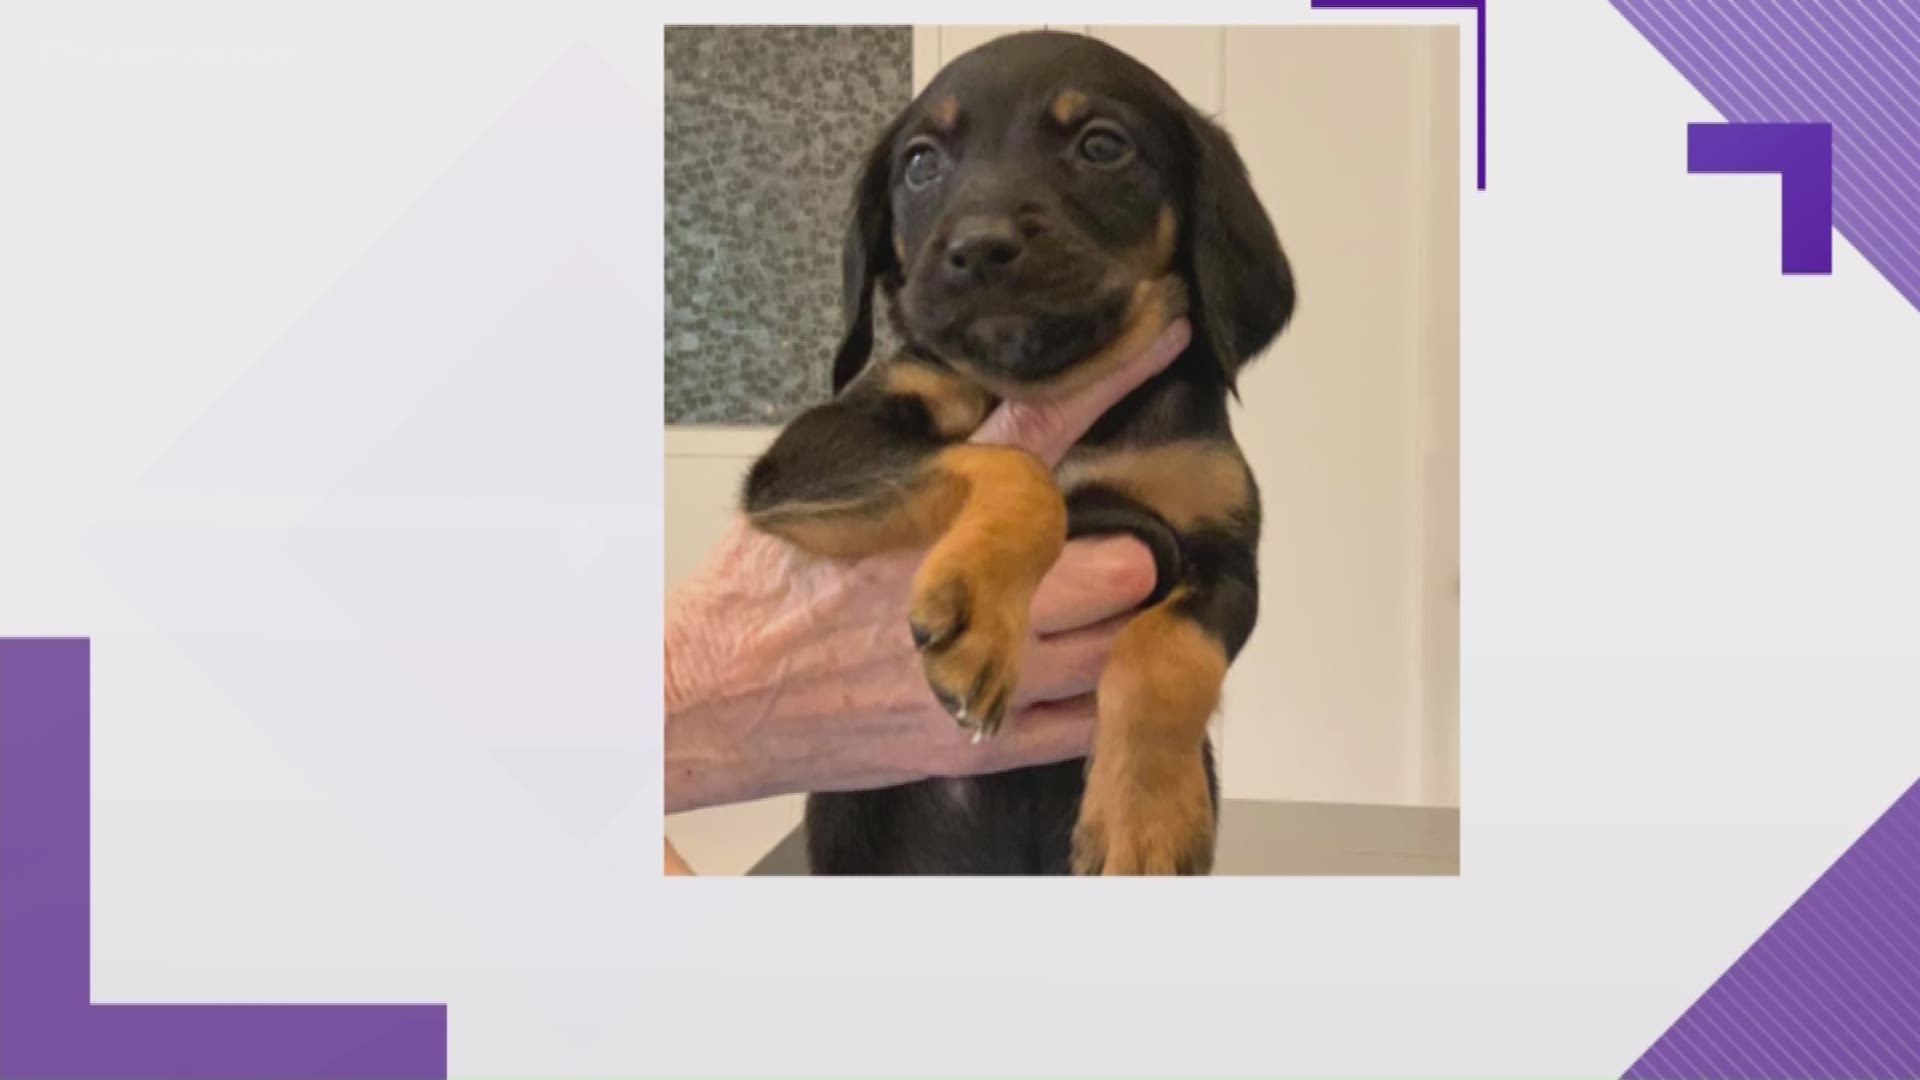 Bam Bam, a very sick puppy, was stolen from Hope For Life Rescue center at night. "Without treatment, he will most likely die," the center said.